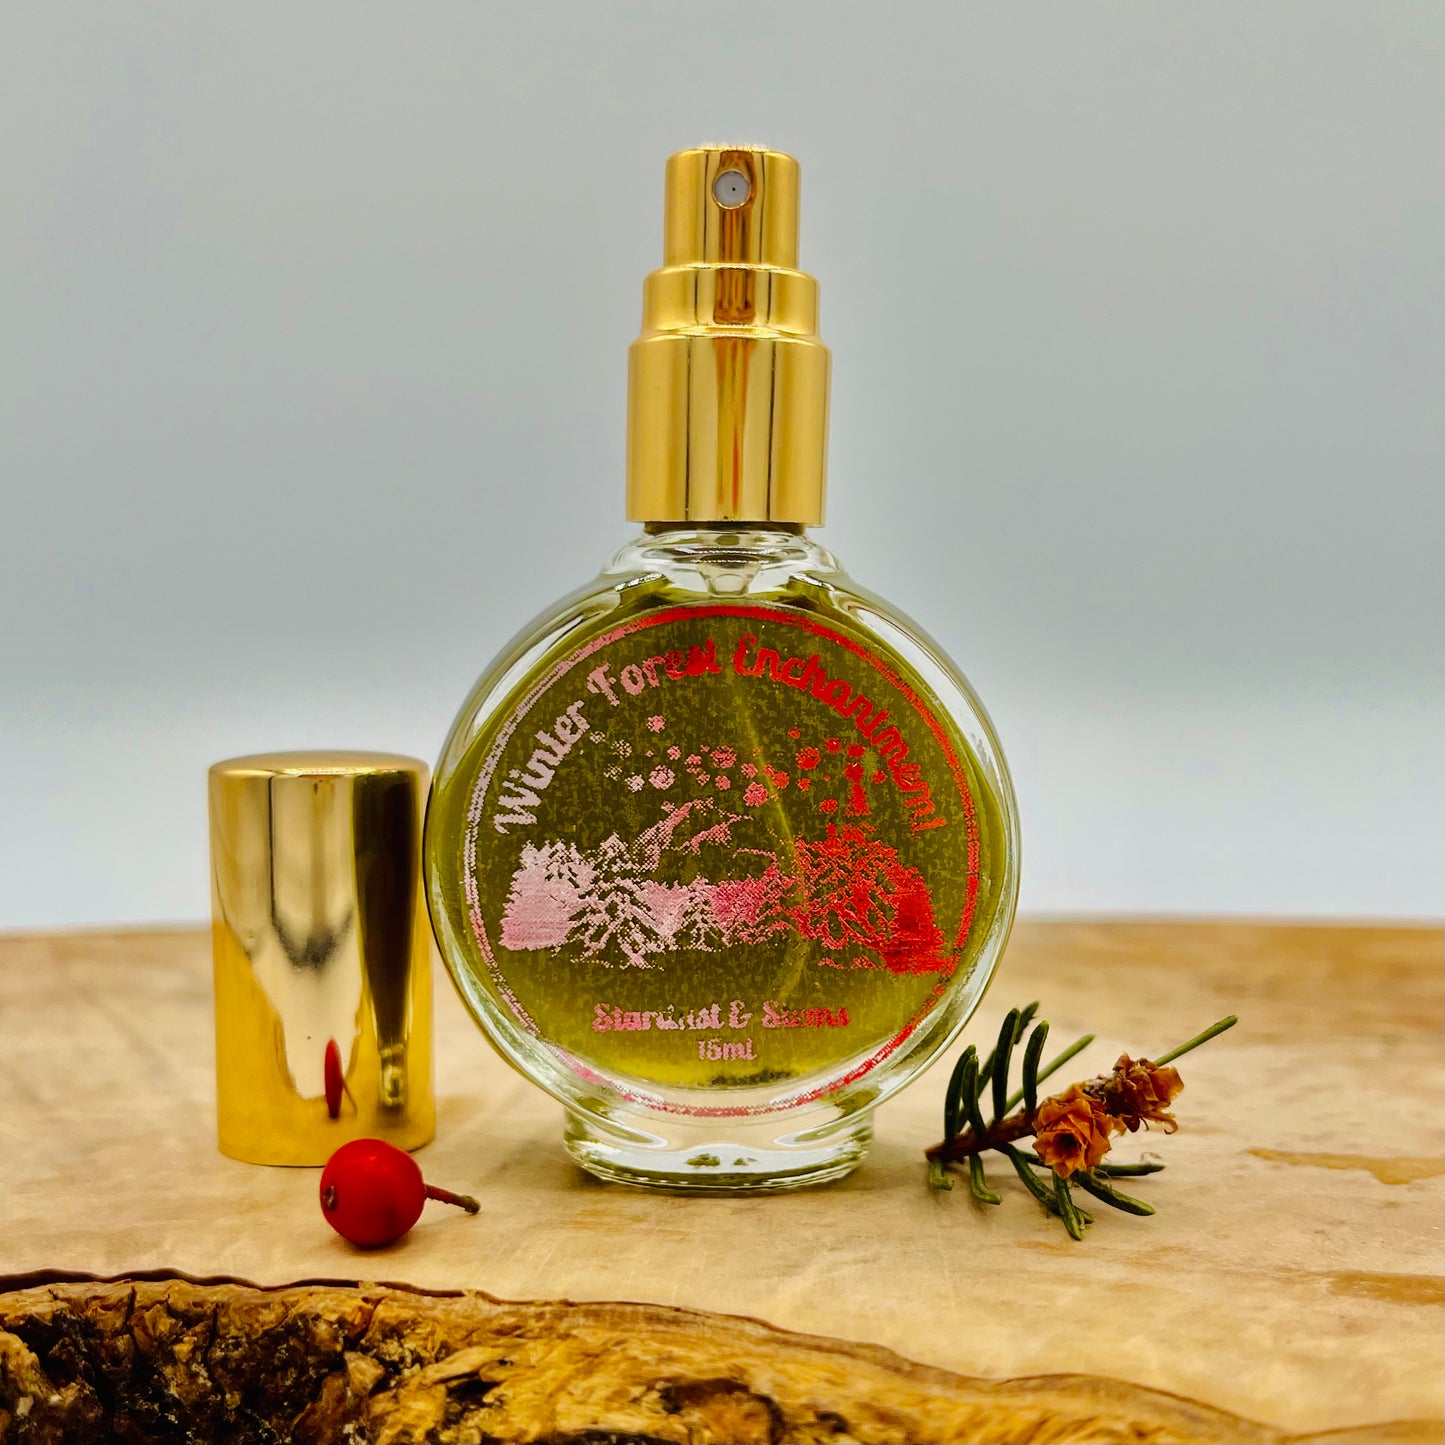 Seasonal Whimsy A Magical Set of Four Handcrafted Perfumes, One for Each Season - Spring, Summer, Fall, and Winter | Handmade, Small batch, Indie Perfume | Paraben Free | Synthetic Fragrance Free